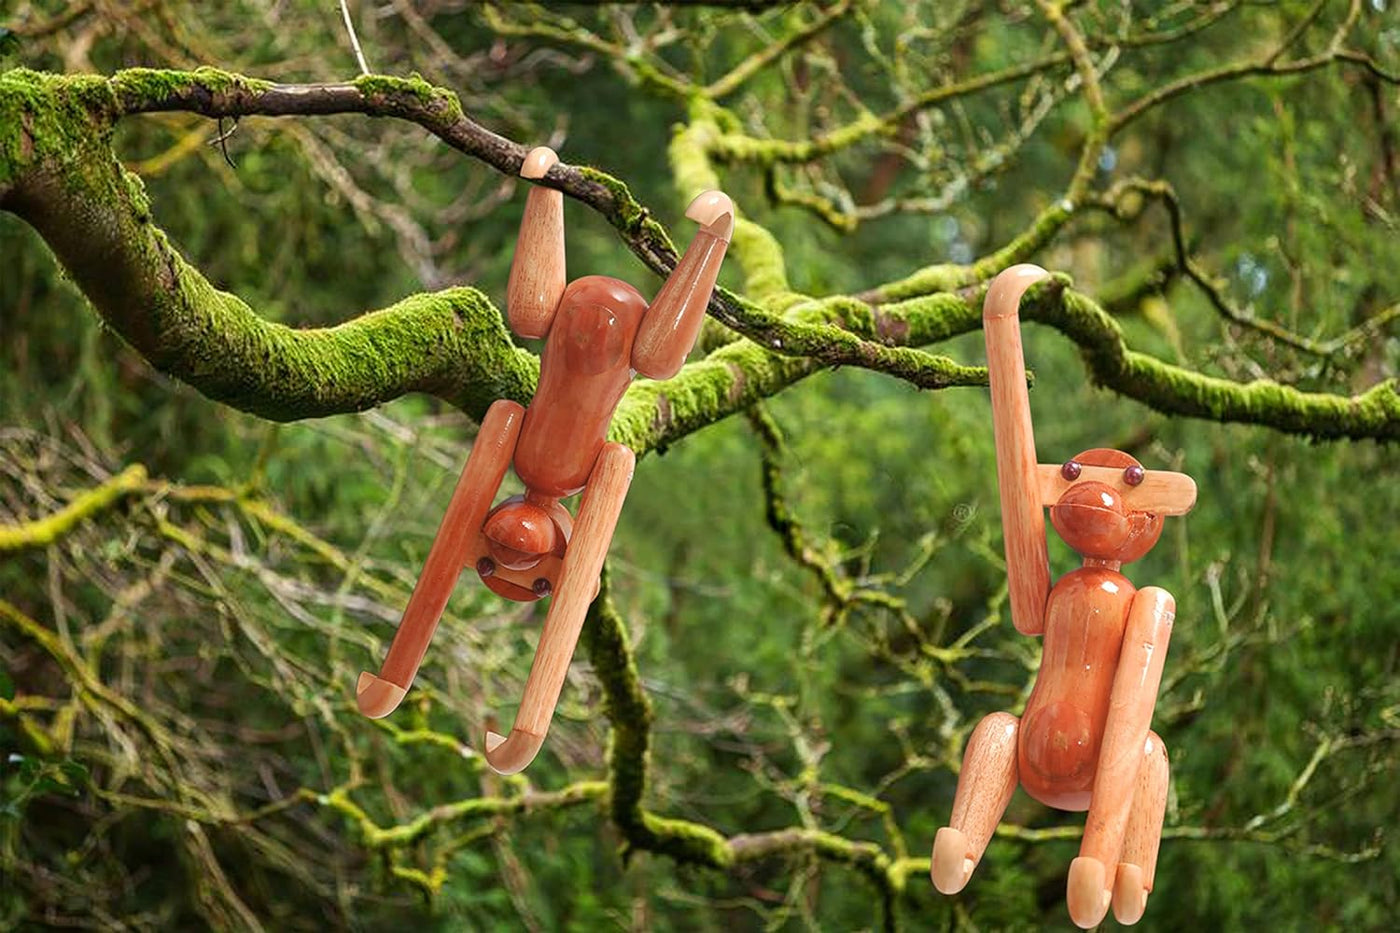 Wooden Cute Monkey/Hanging Monkey for Kids, Toddlers (2 Years+) Pack of 1 - Pretend Play Toy for Kids, Improves Childs Imagination